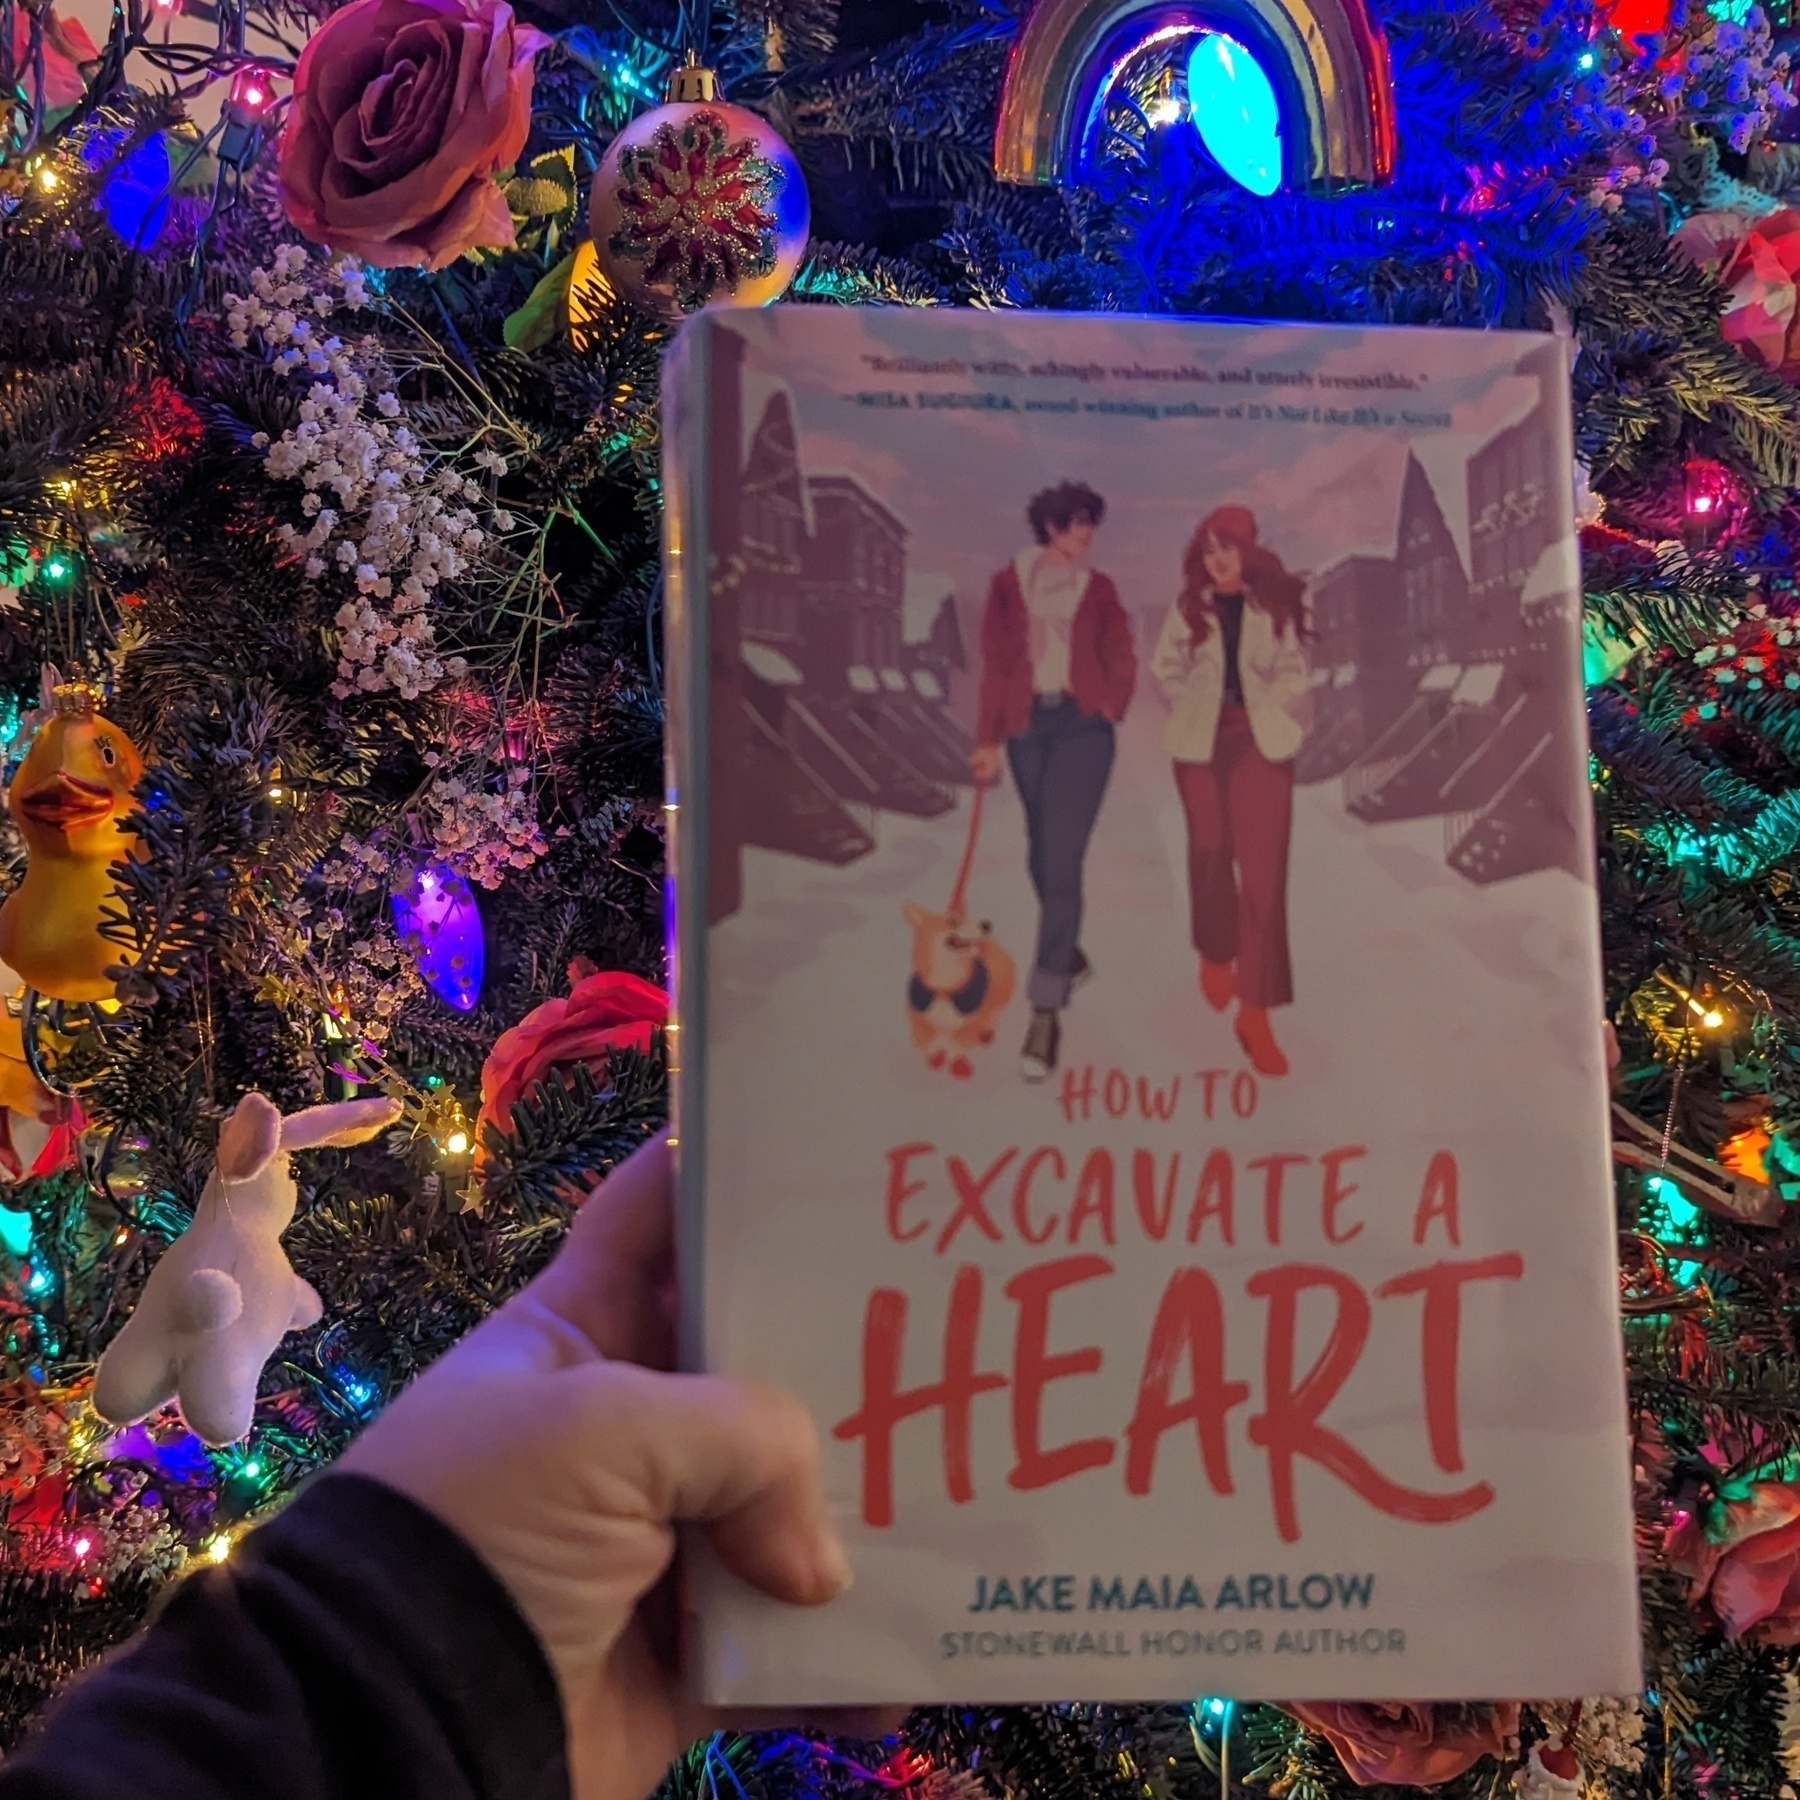 A hand holding a book titled 'How to Excavate a Heart' by Jake Maia Arlow in front of a brightly decorated Christmas tree.